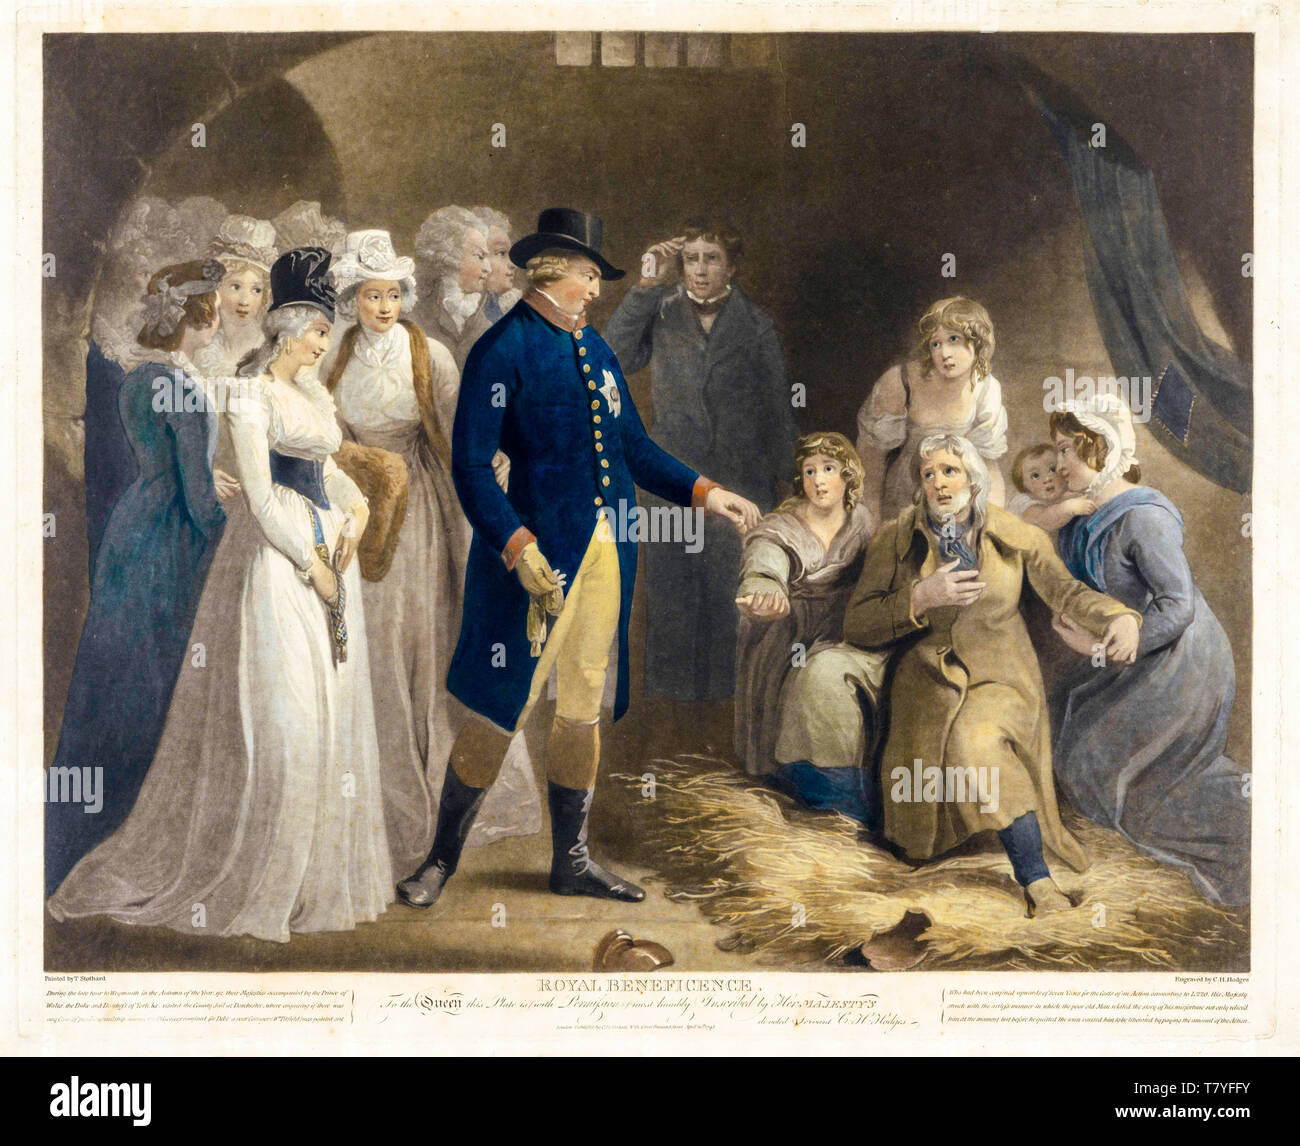 George III and the royal family visit Dorchester prison, Royal Beneficence, print, 1793 Stock Photo